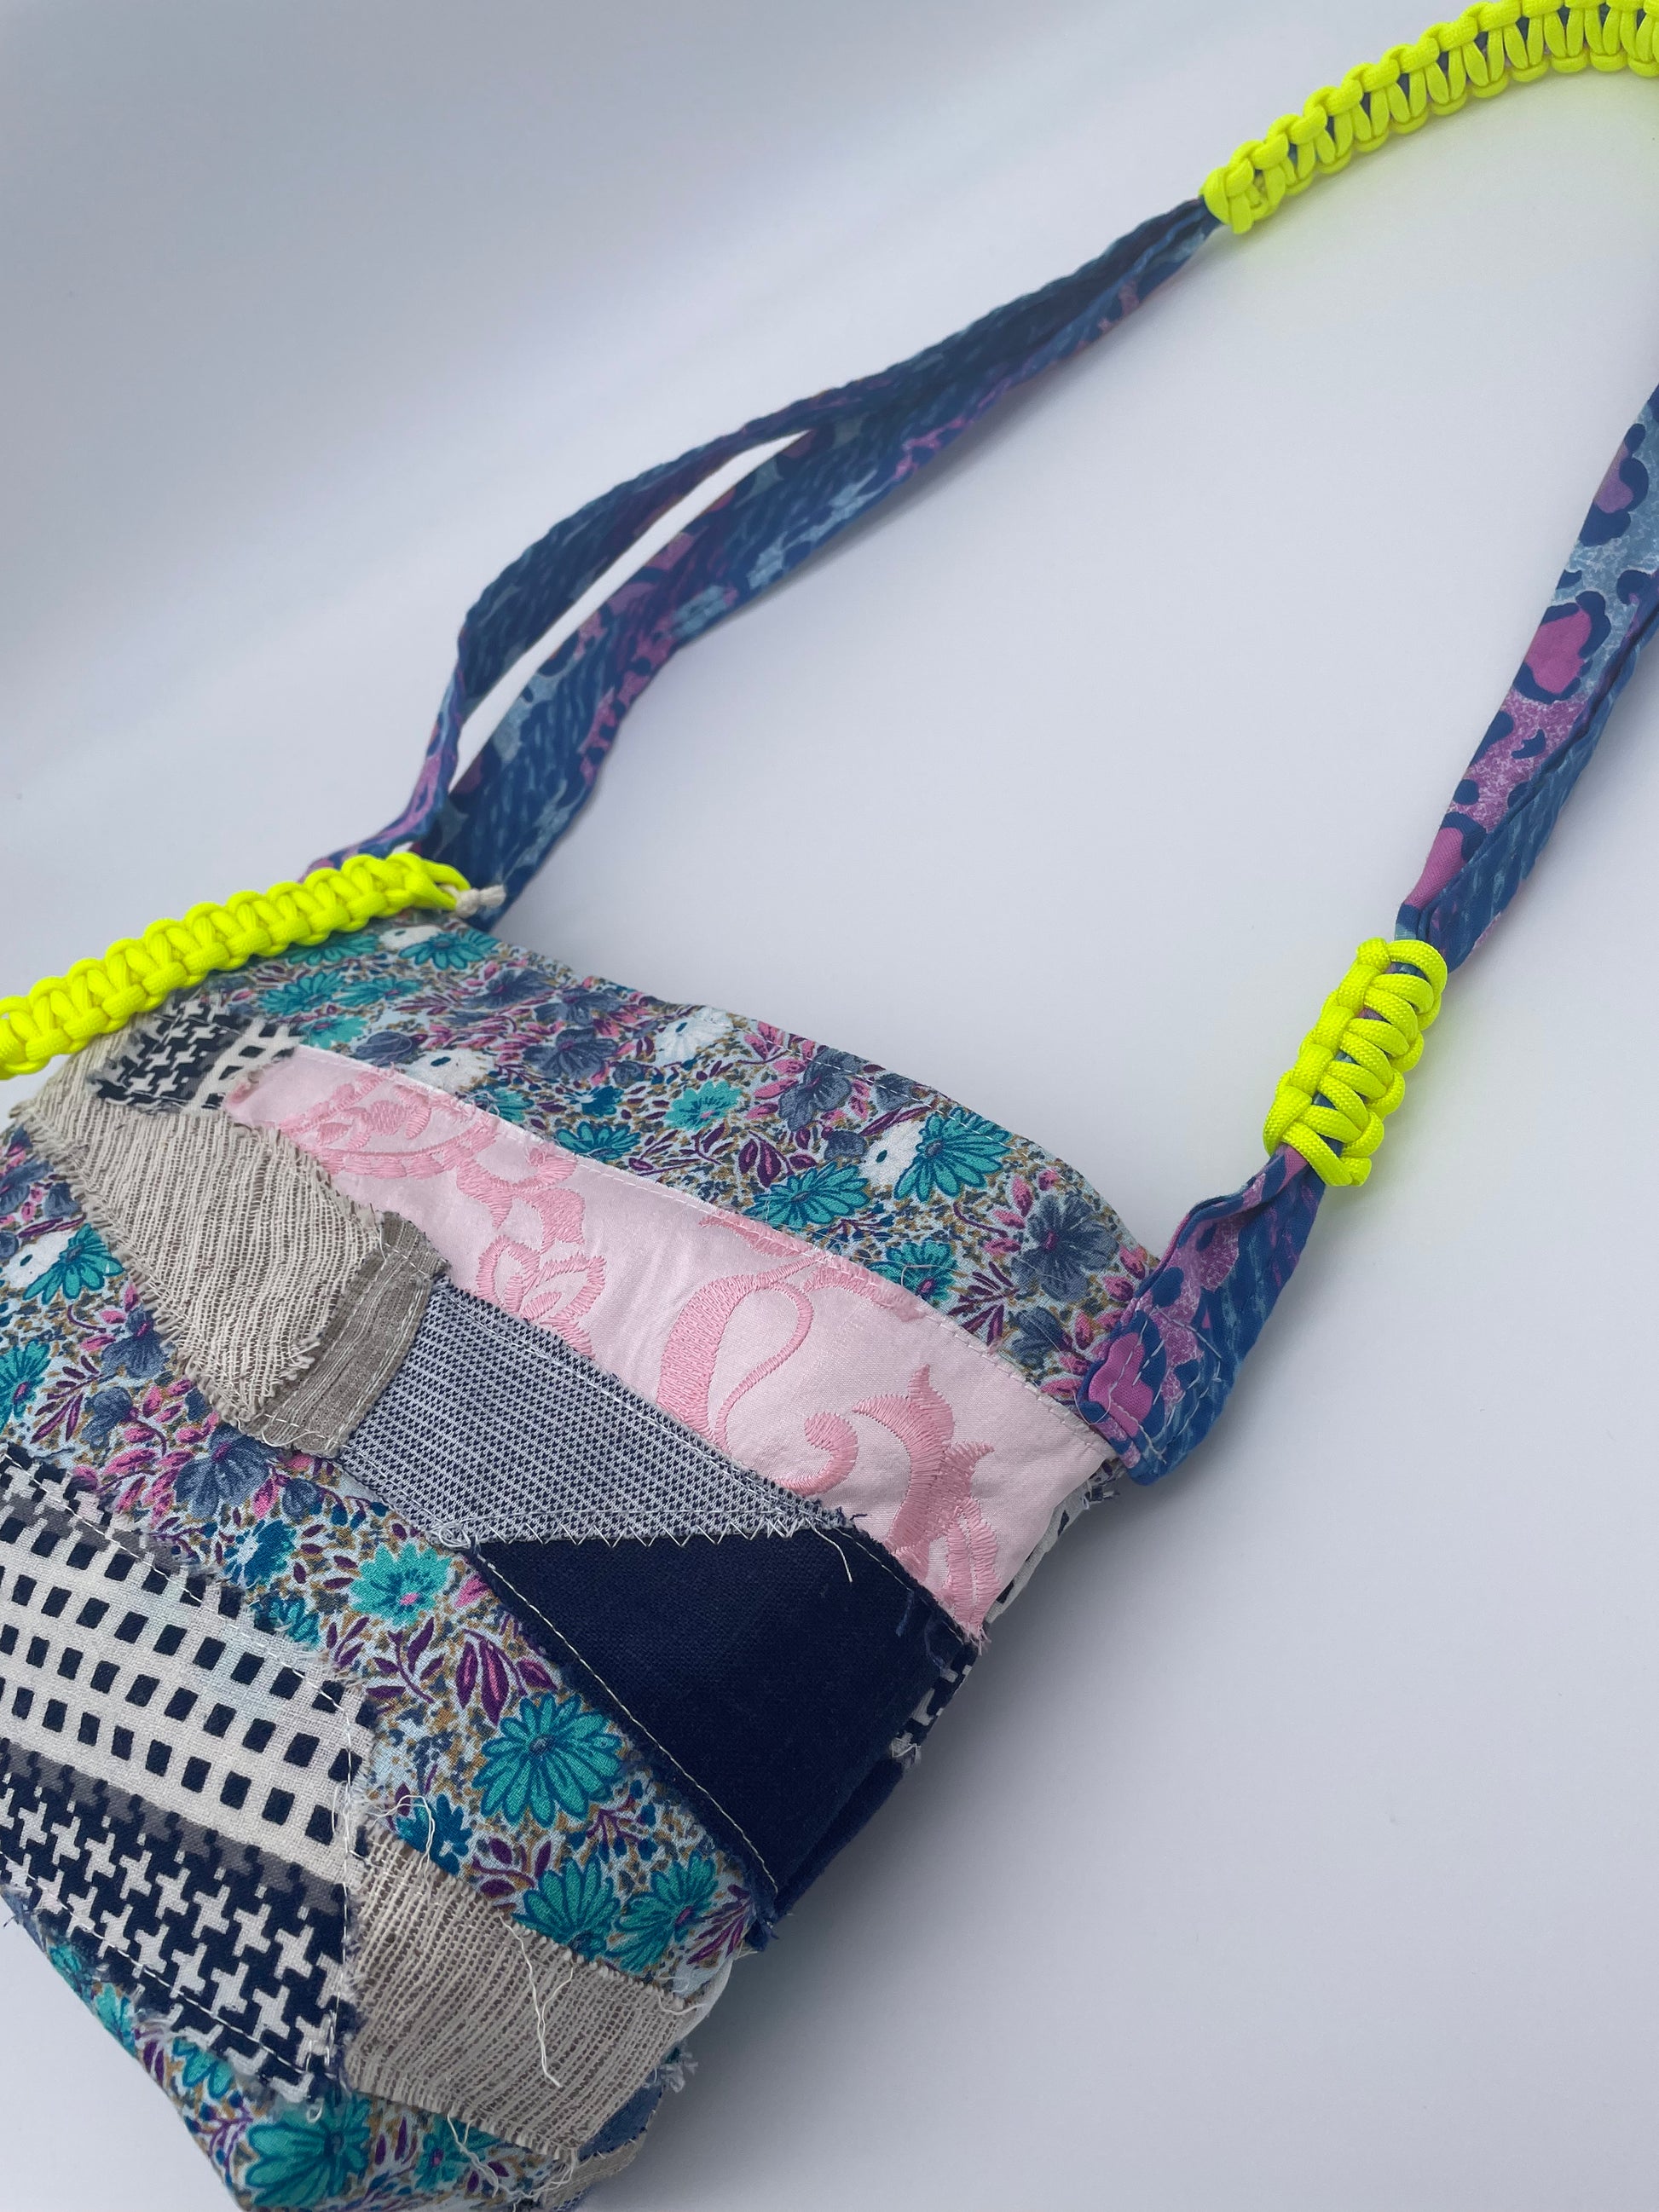 Upcycled Patchwork Linen Boxy Pouch Coin Purse Earphone AirPod Pouch  Sustainable Gift Recycled Repurposed Slow Fashion 